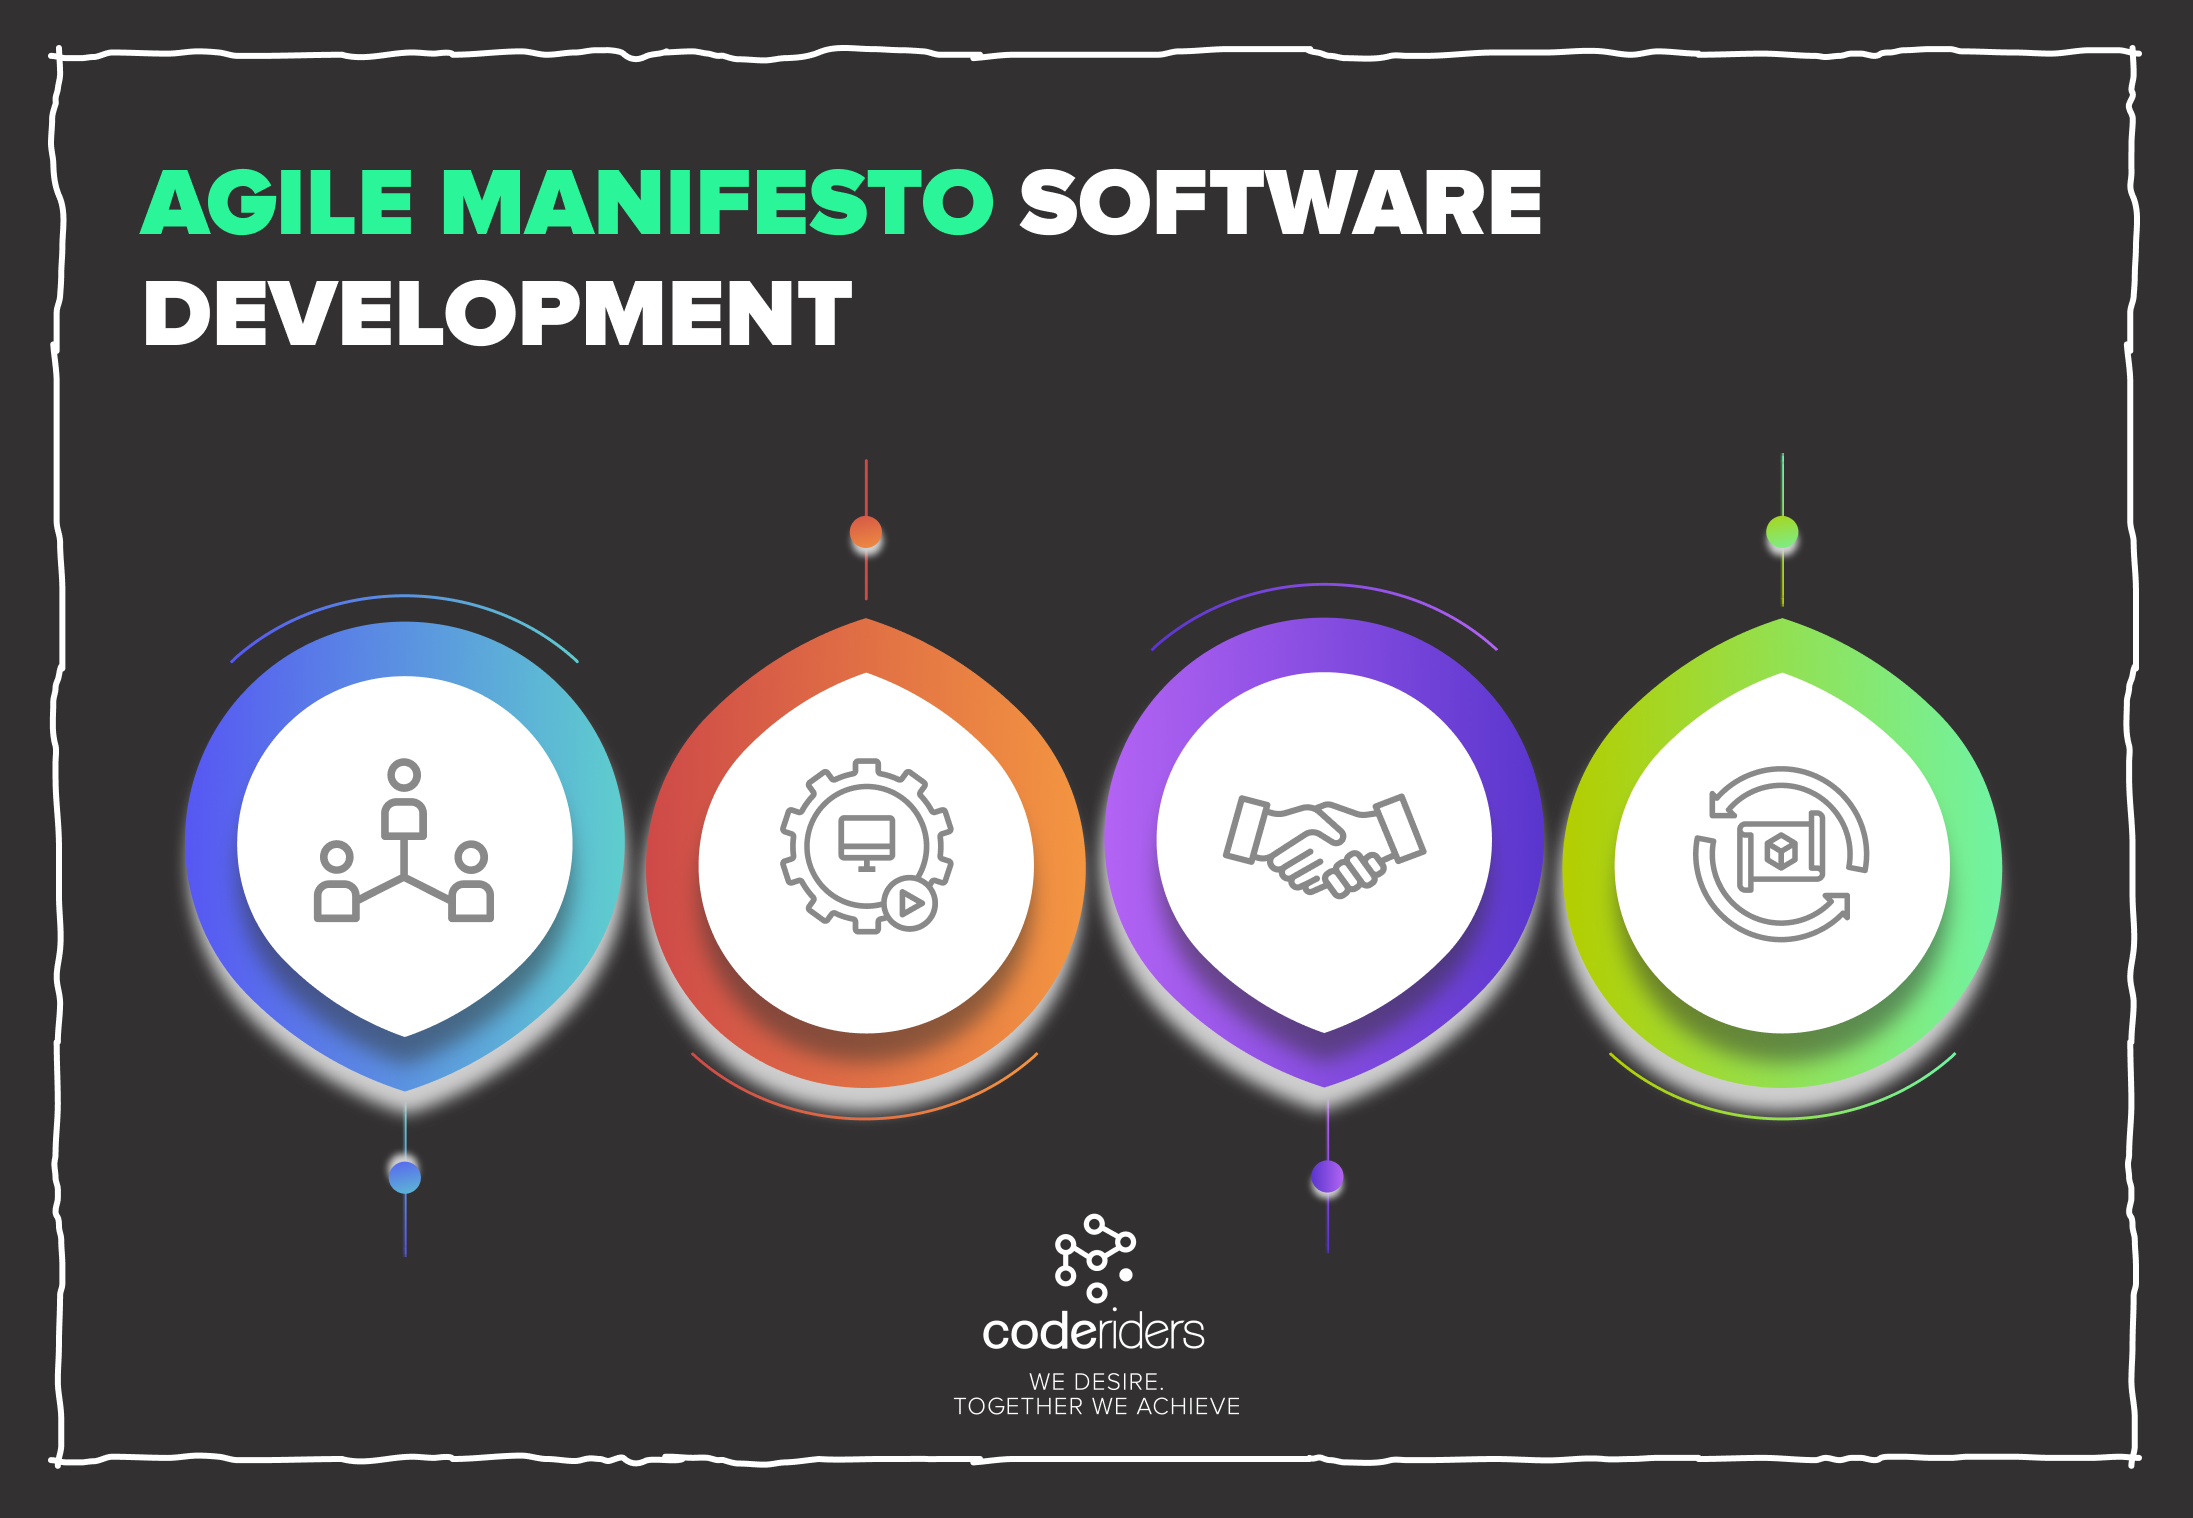 Agile Manifesto chooses change over fixed plan in software development outsourcing